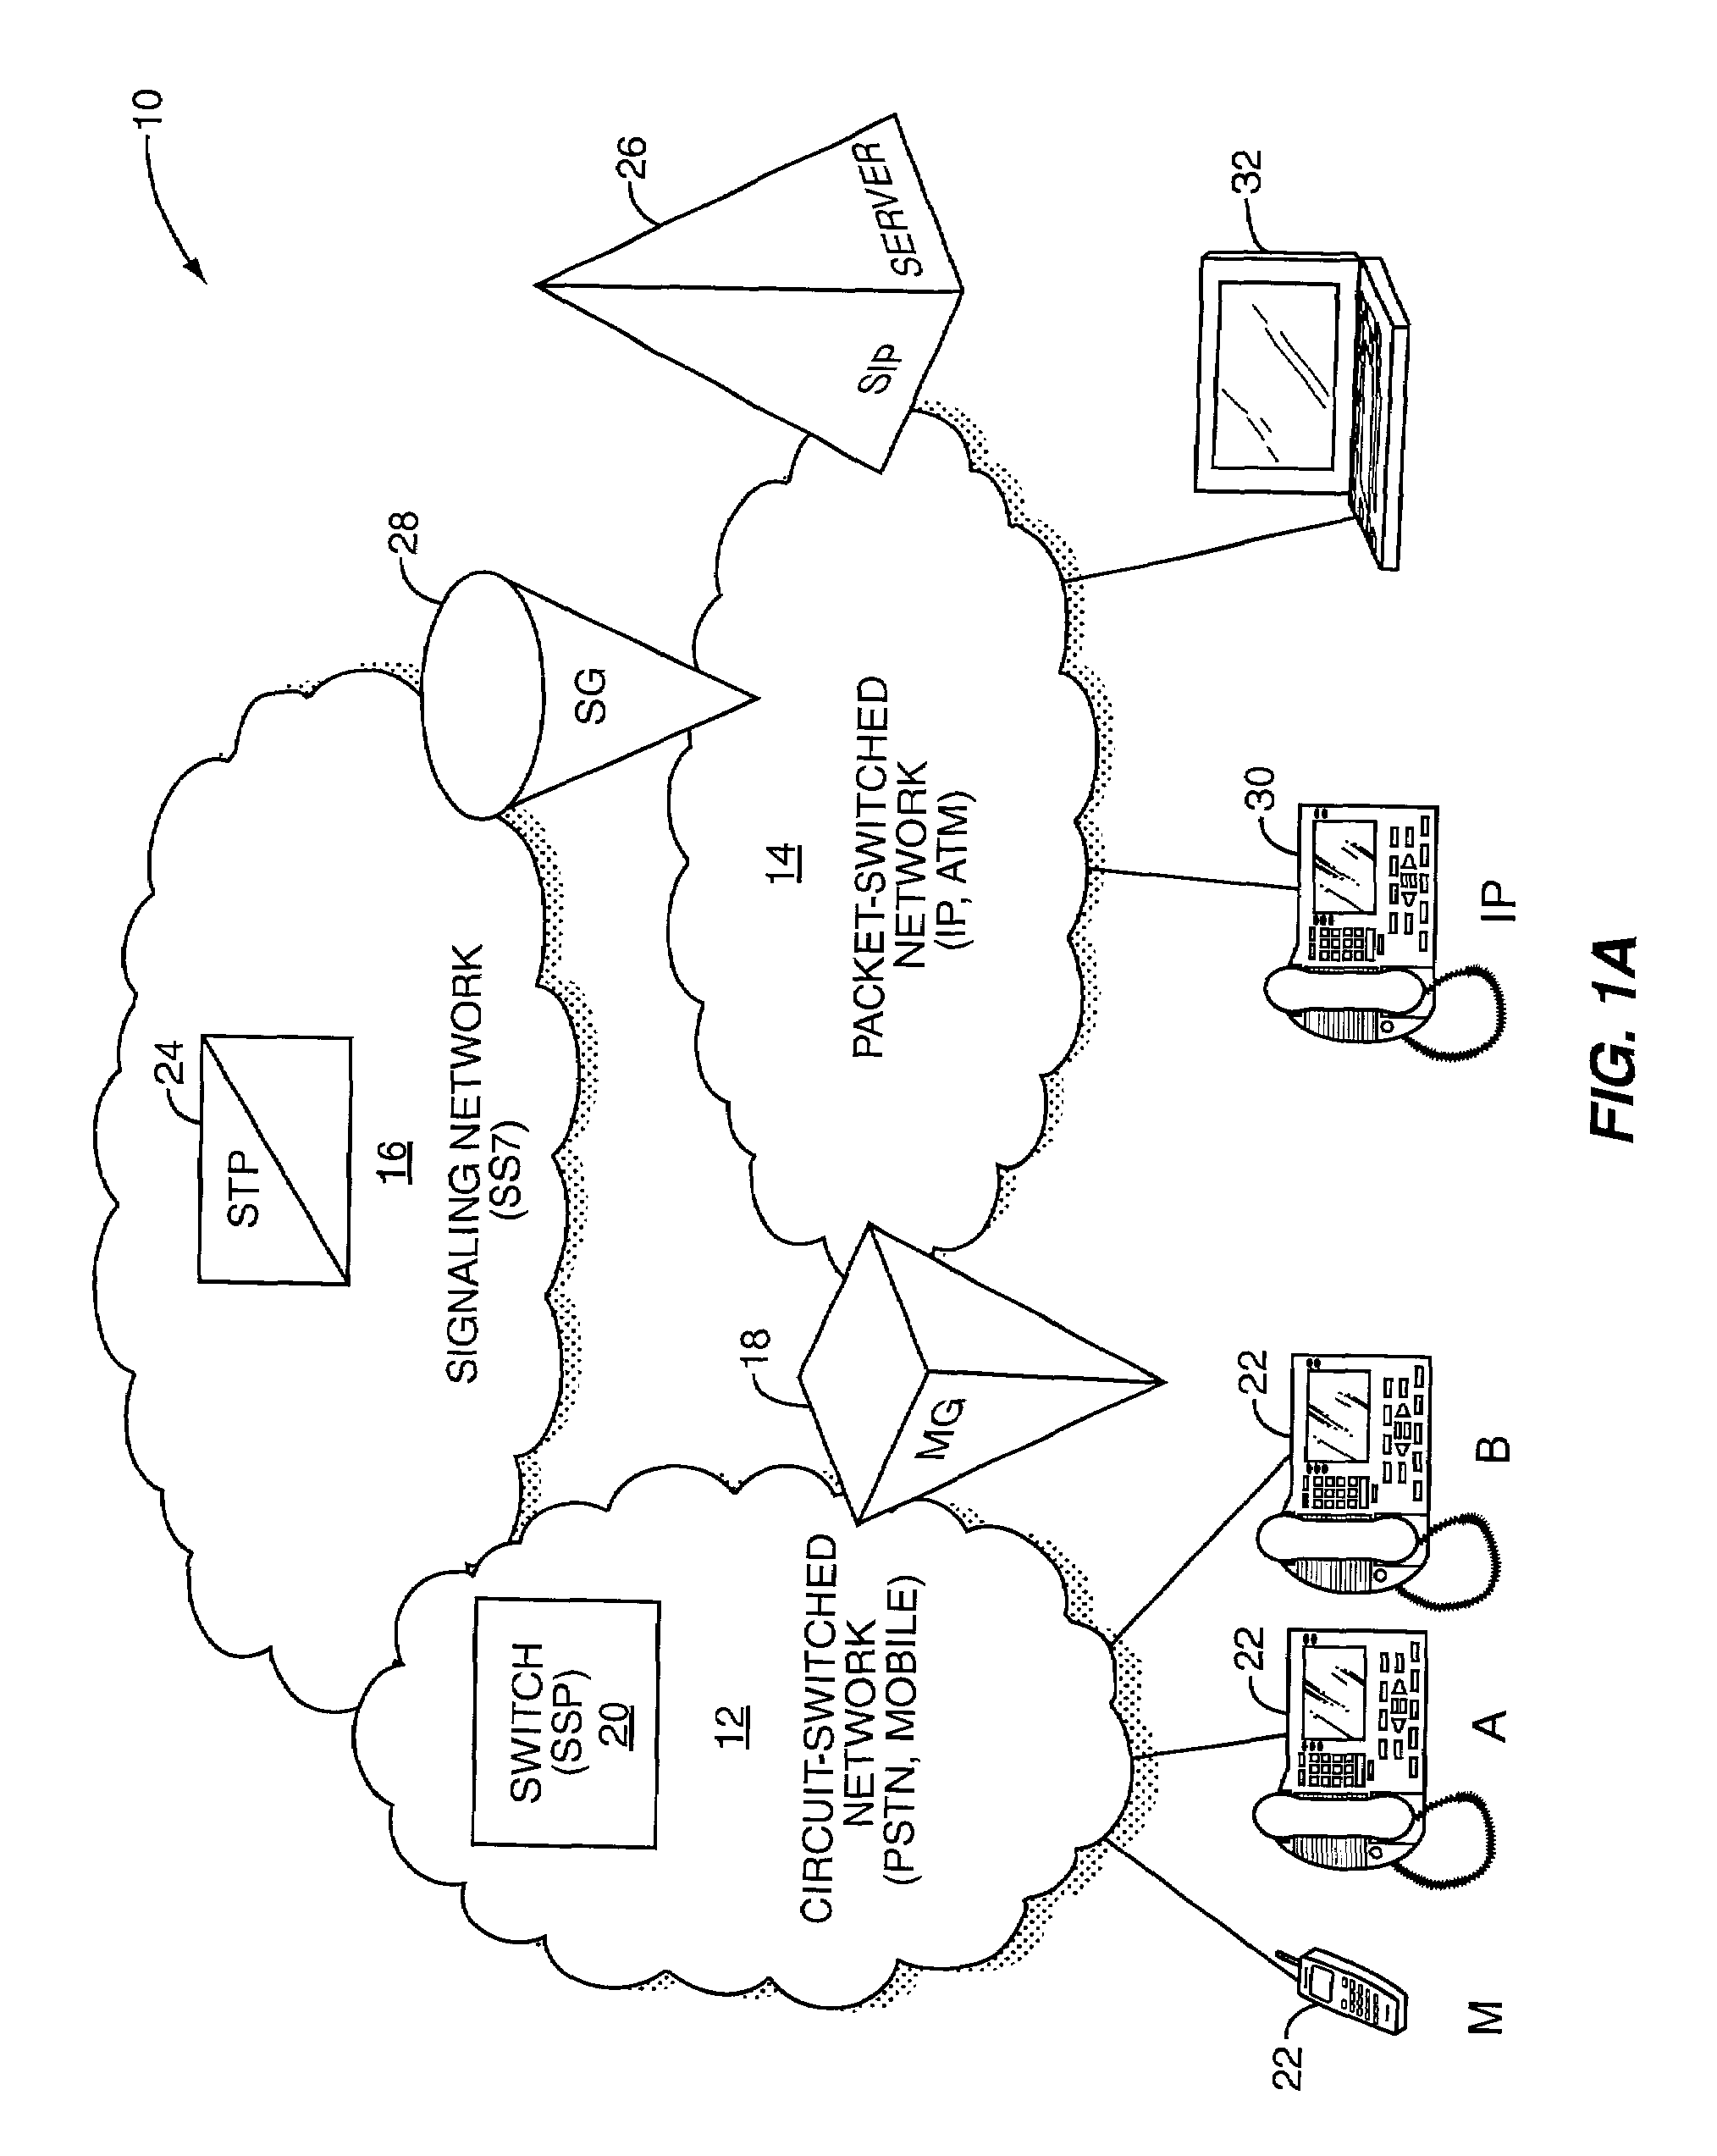 Transaction management for interworking between disparate networks